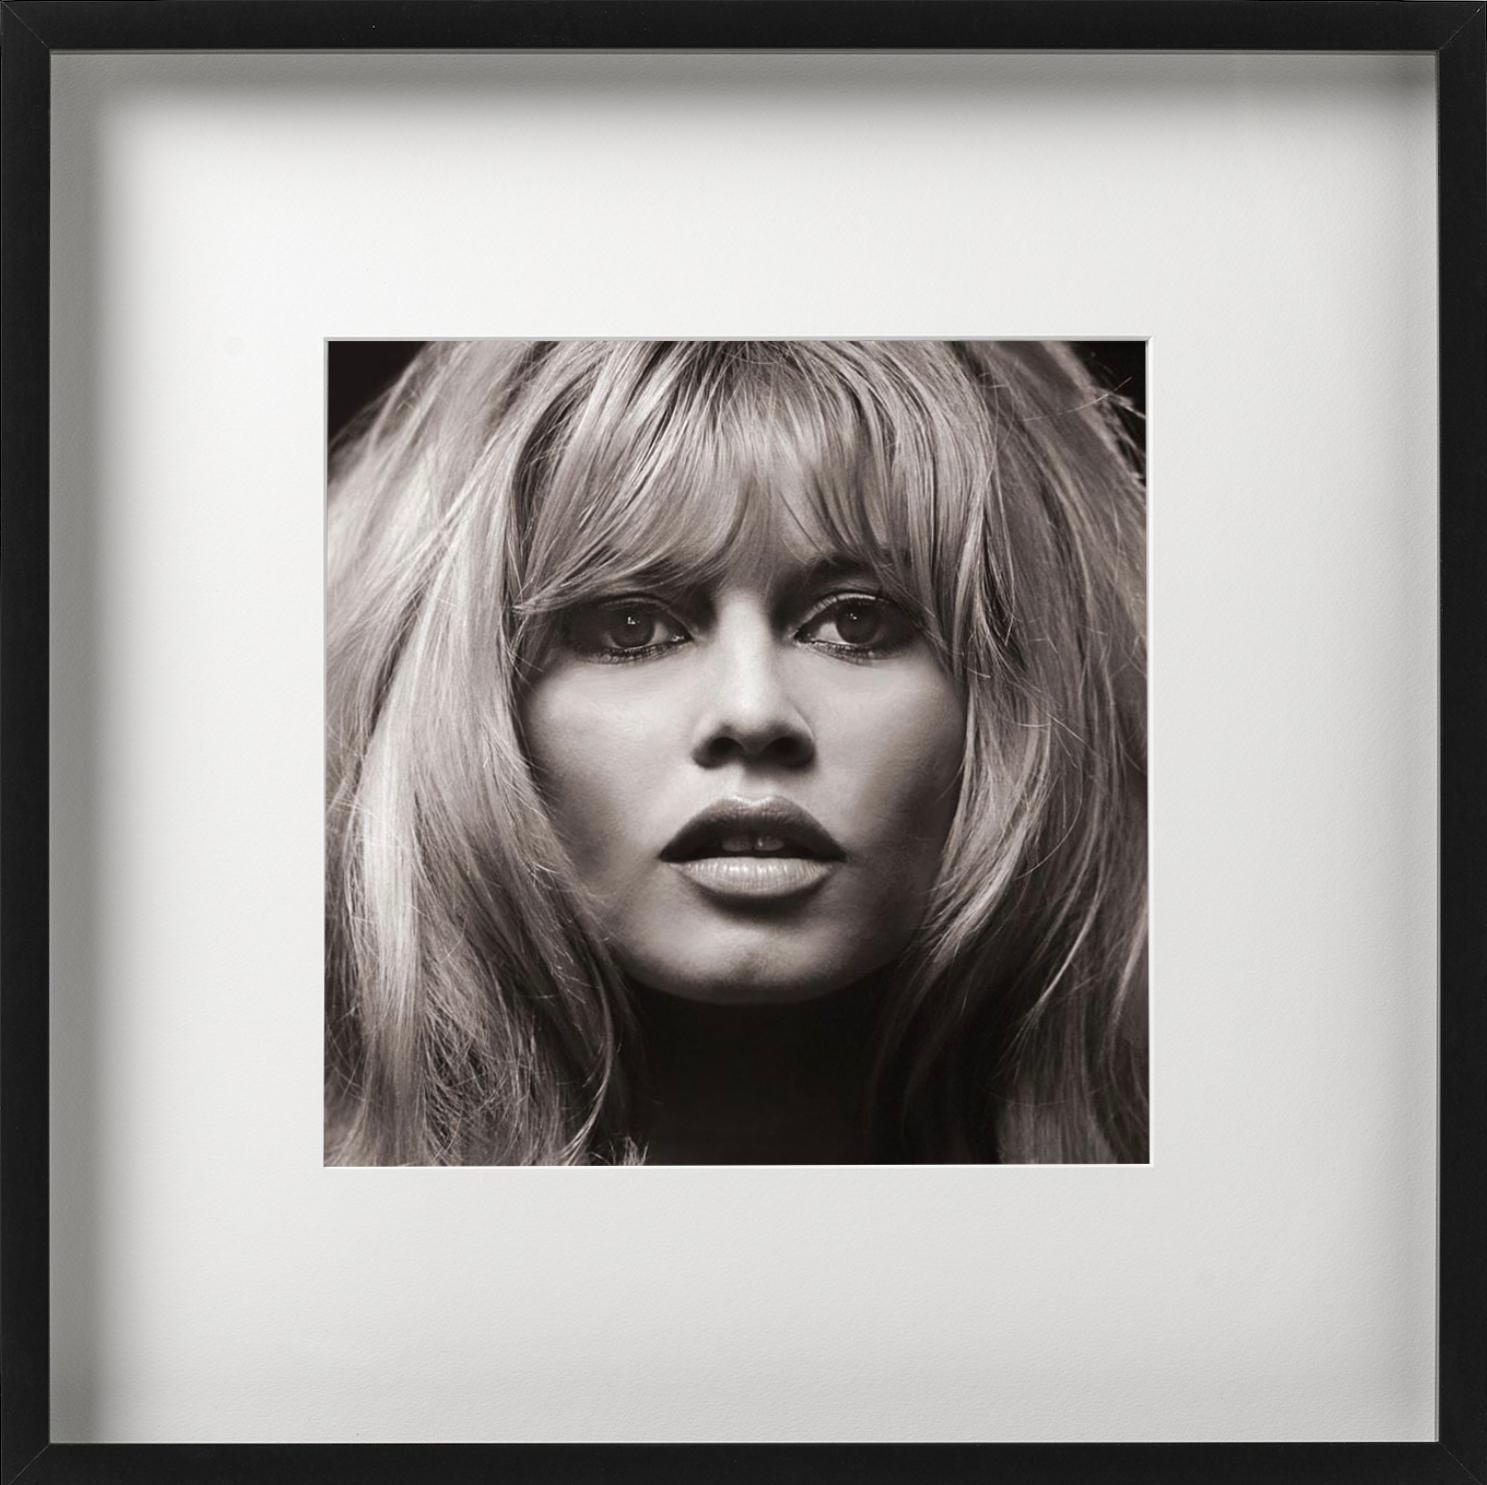 Brigitte Bardot - portrait of the French actress and cultural icon - Photograph by Douglas Kirkland